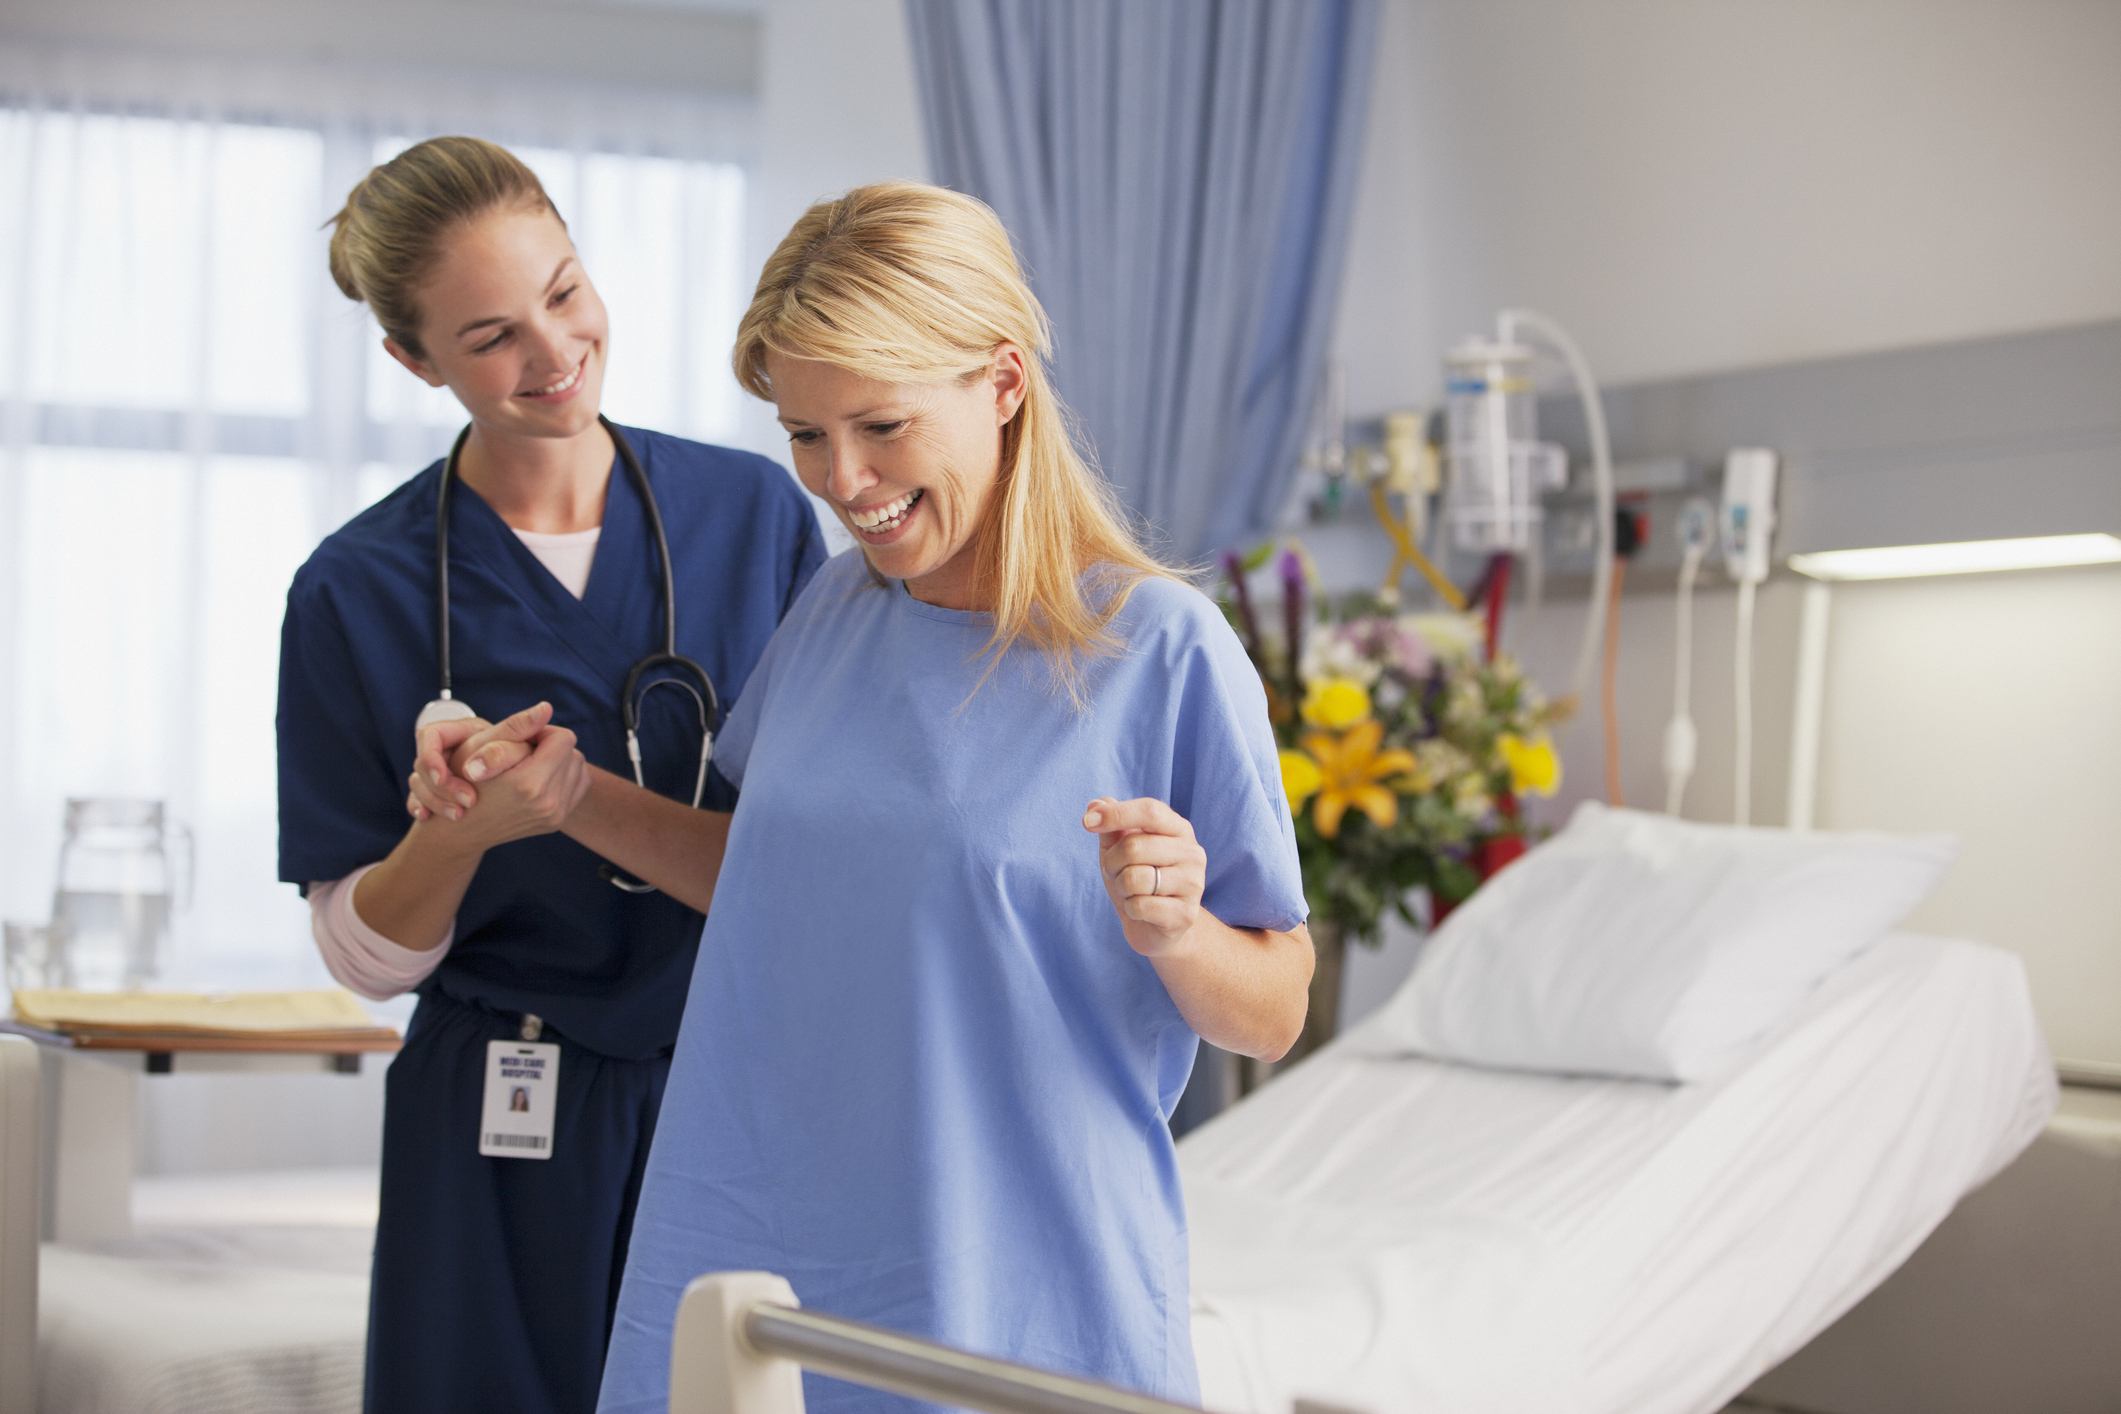 nurse helping patient stand up